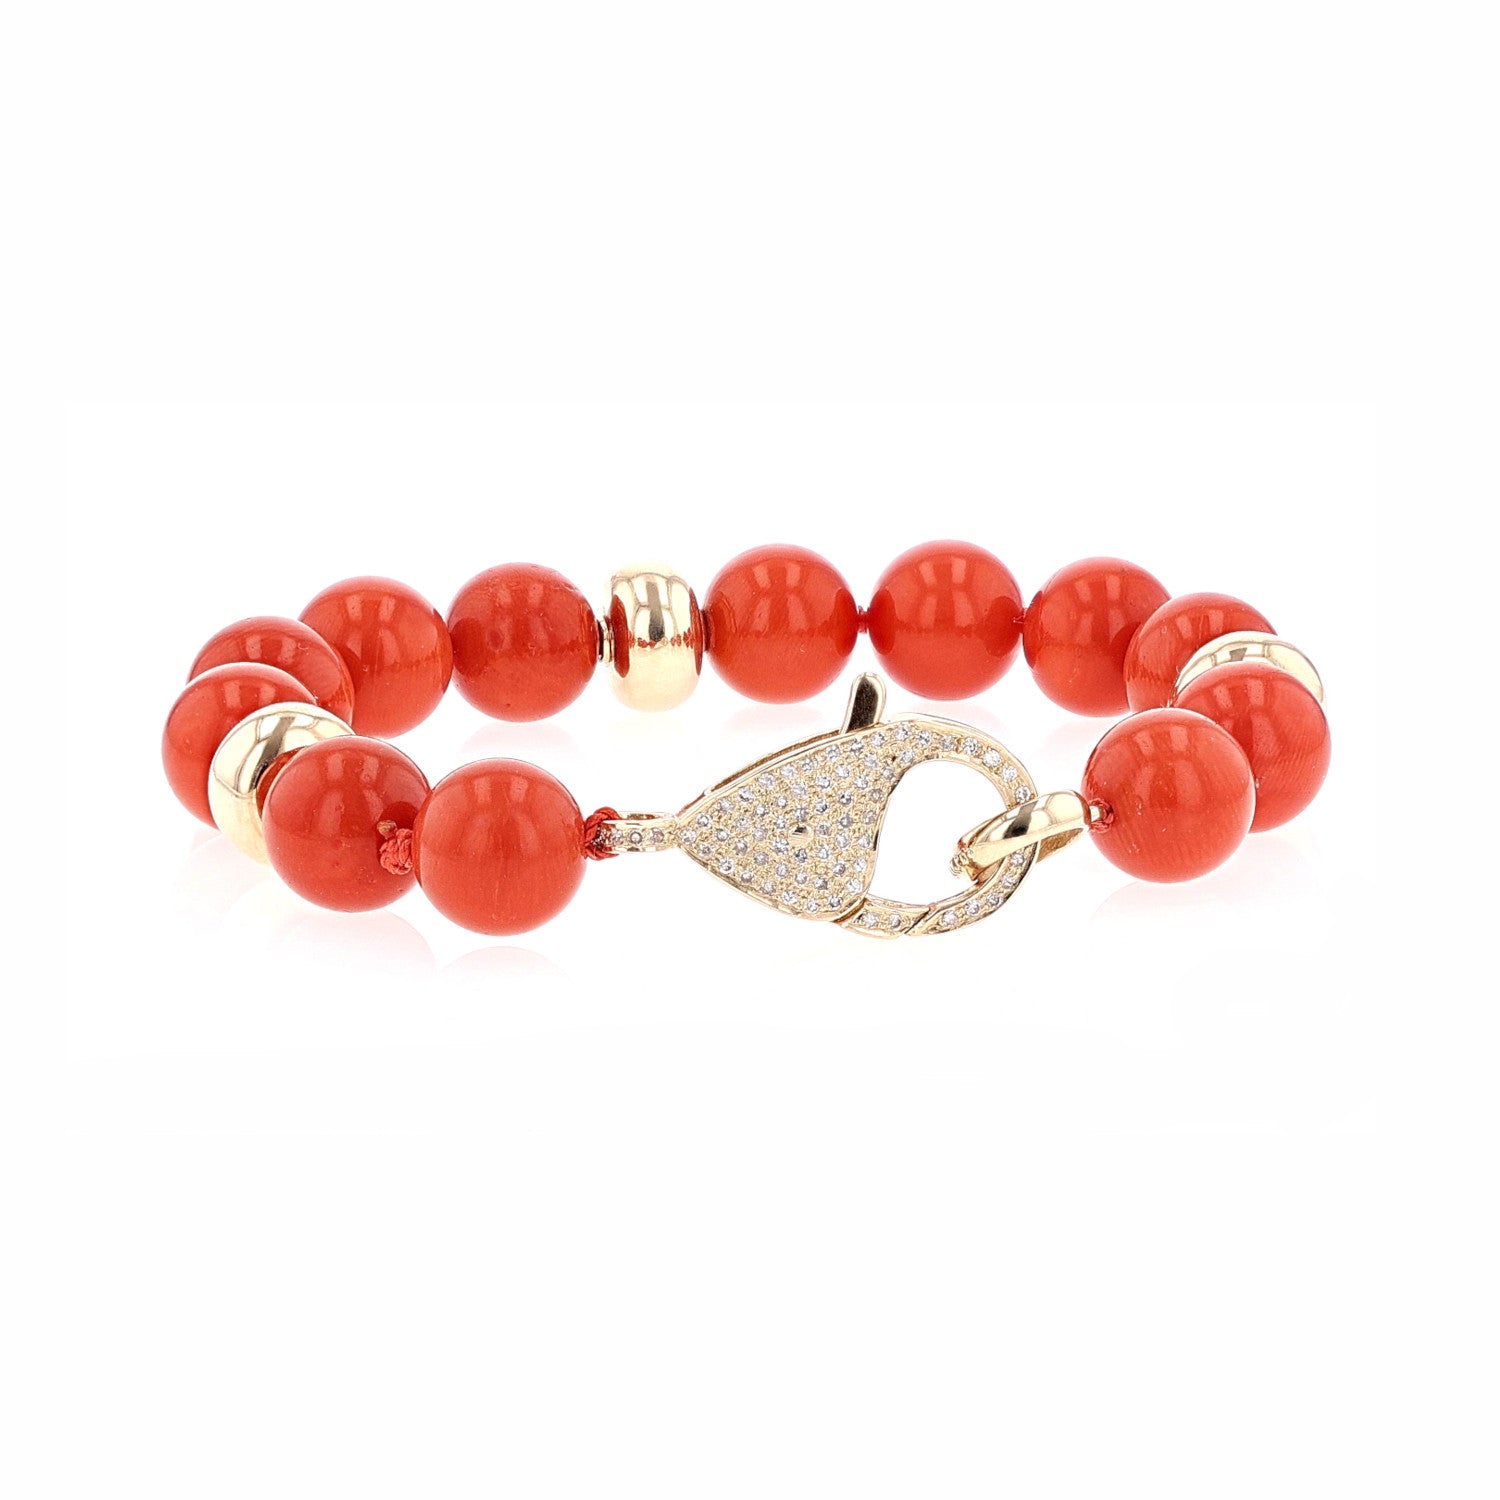 Italian Red Coral Knotted Bead Bracelet with 14K Gold Beads  BG000795 - TBird